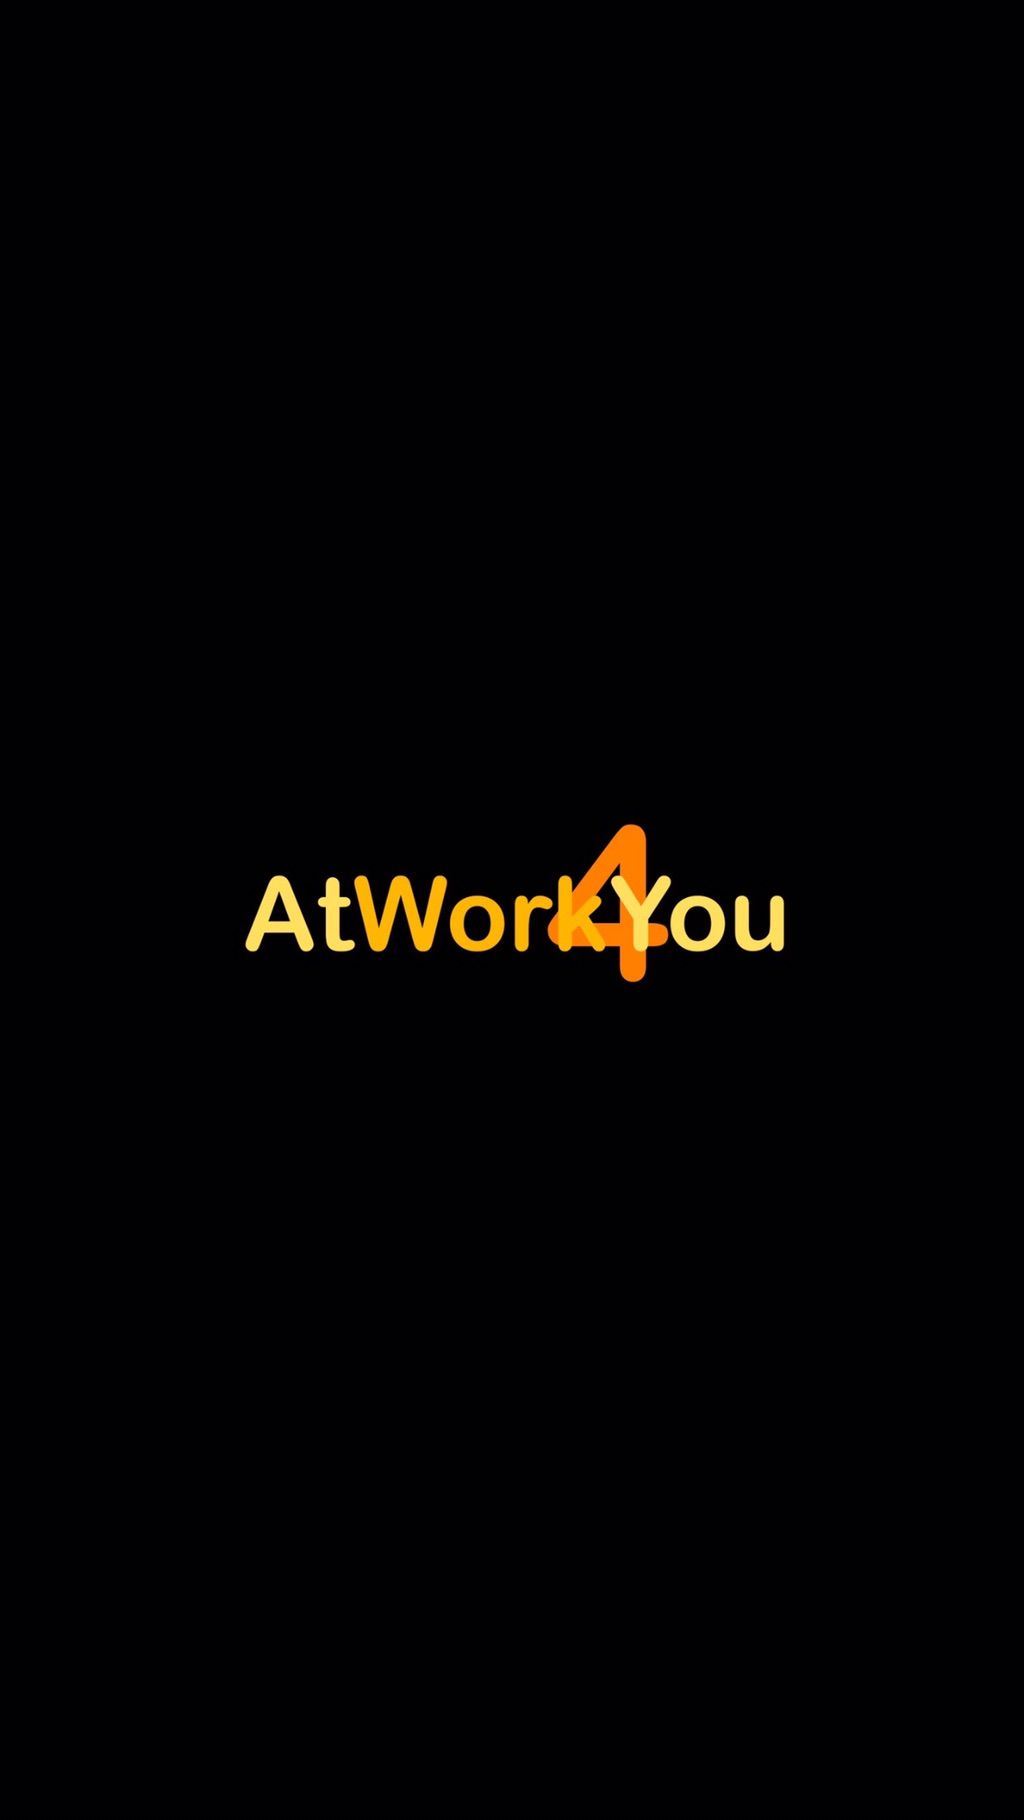 Atwork4you